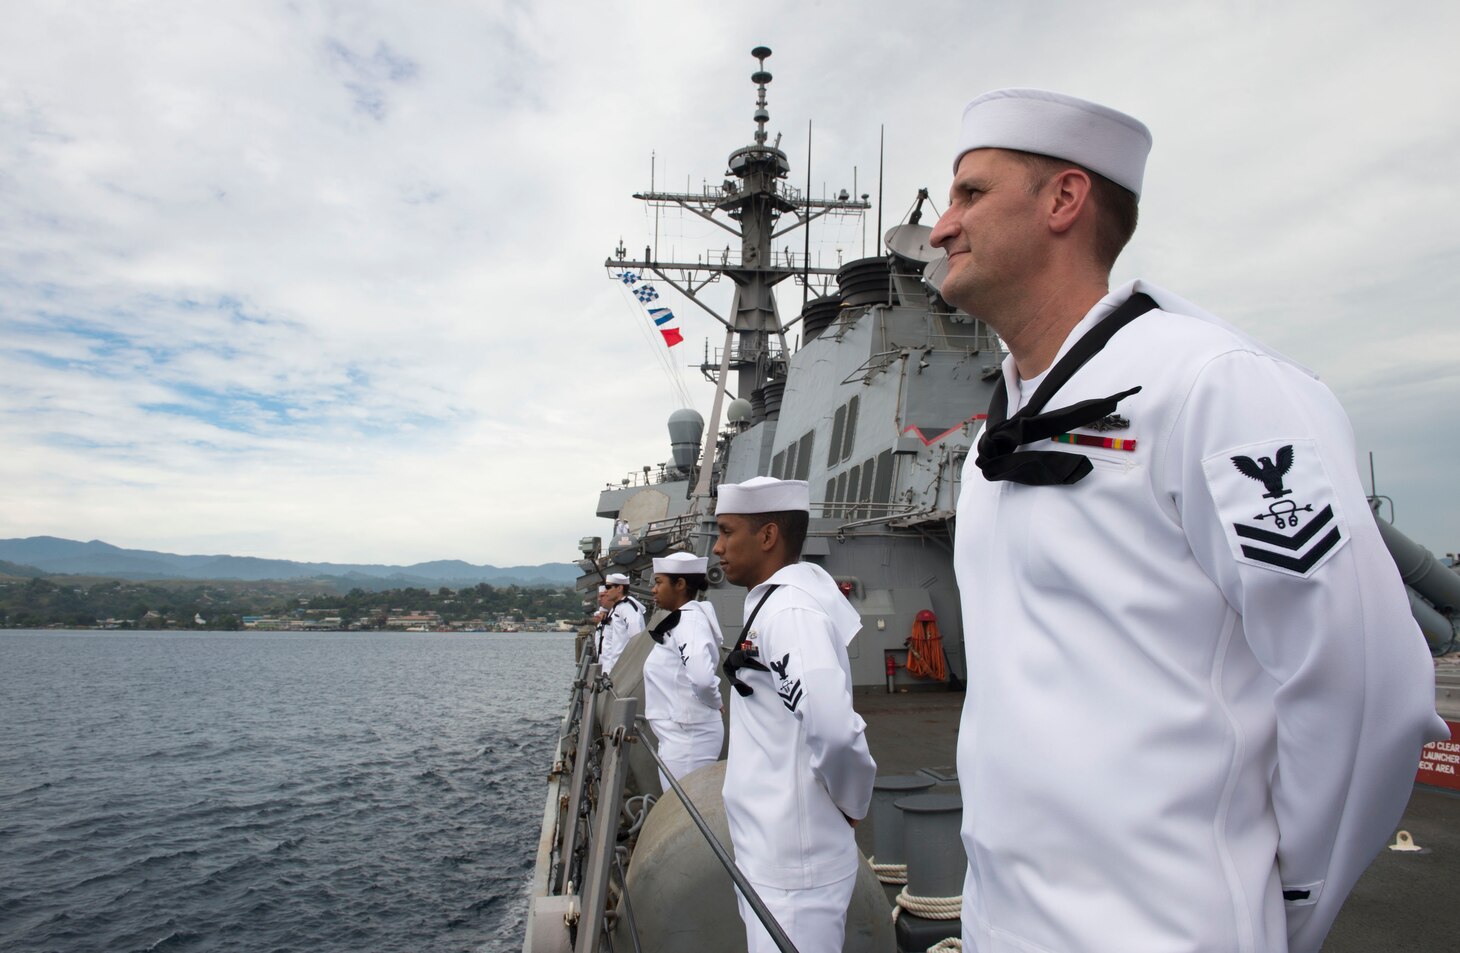 Sonar Technician (Surface) 2nd Class Matthew Fryer, assigned to the Arleigh Burke-class guided-missile destroyer USS Barry (DDG 52), stands at parade rest while pulling into Guadalcanal for a port visit to commemorate the 75th anniversary of the Guadalcanal Campaign. The 75th commemoration is a tribute to the courage, service, and sacrifice of those who fought in the Guadalcanal Campaign of World War II.